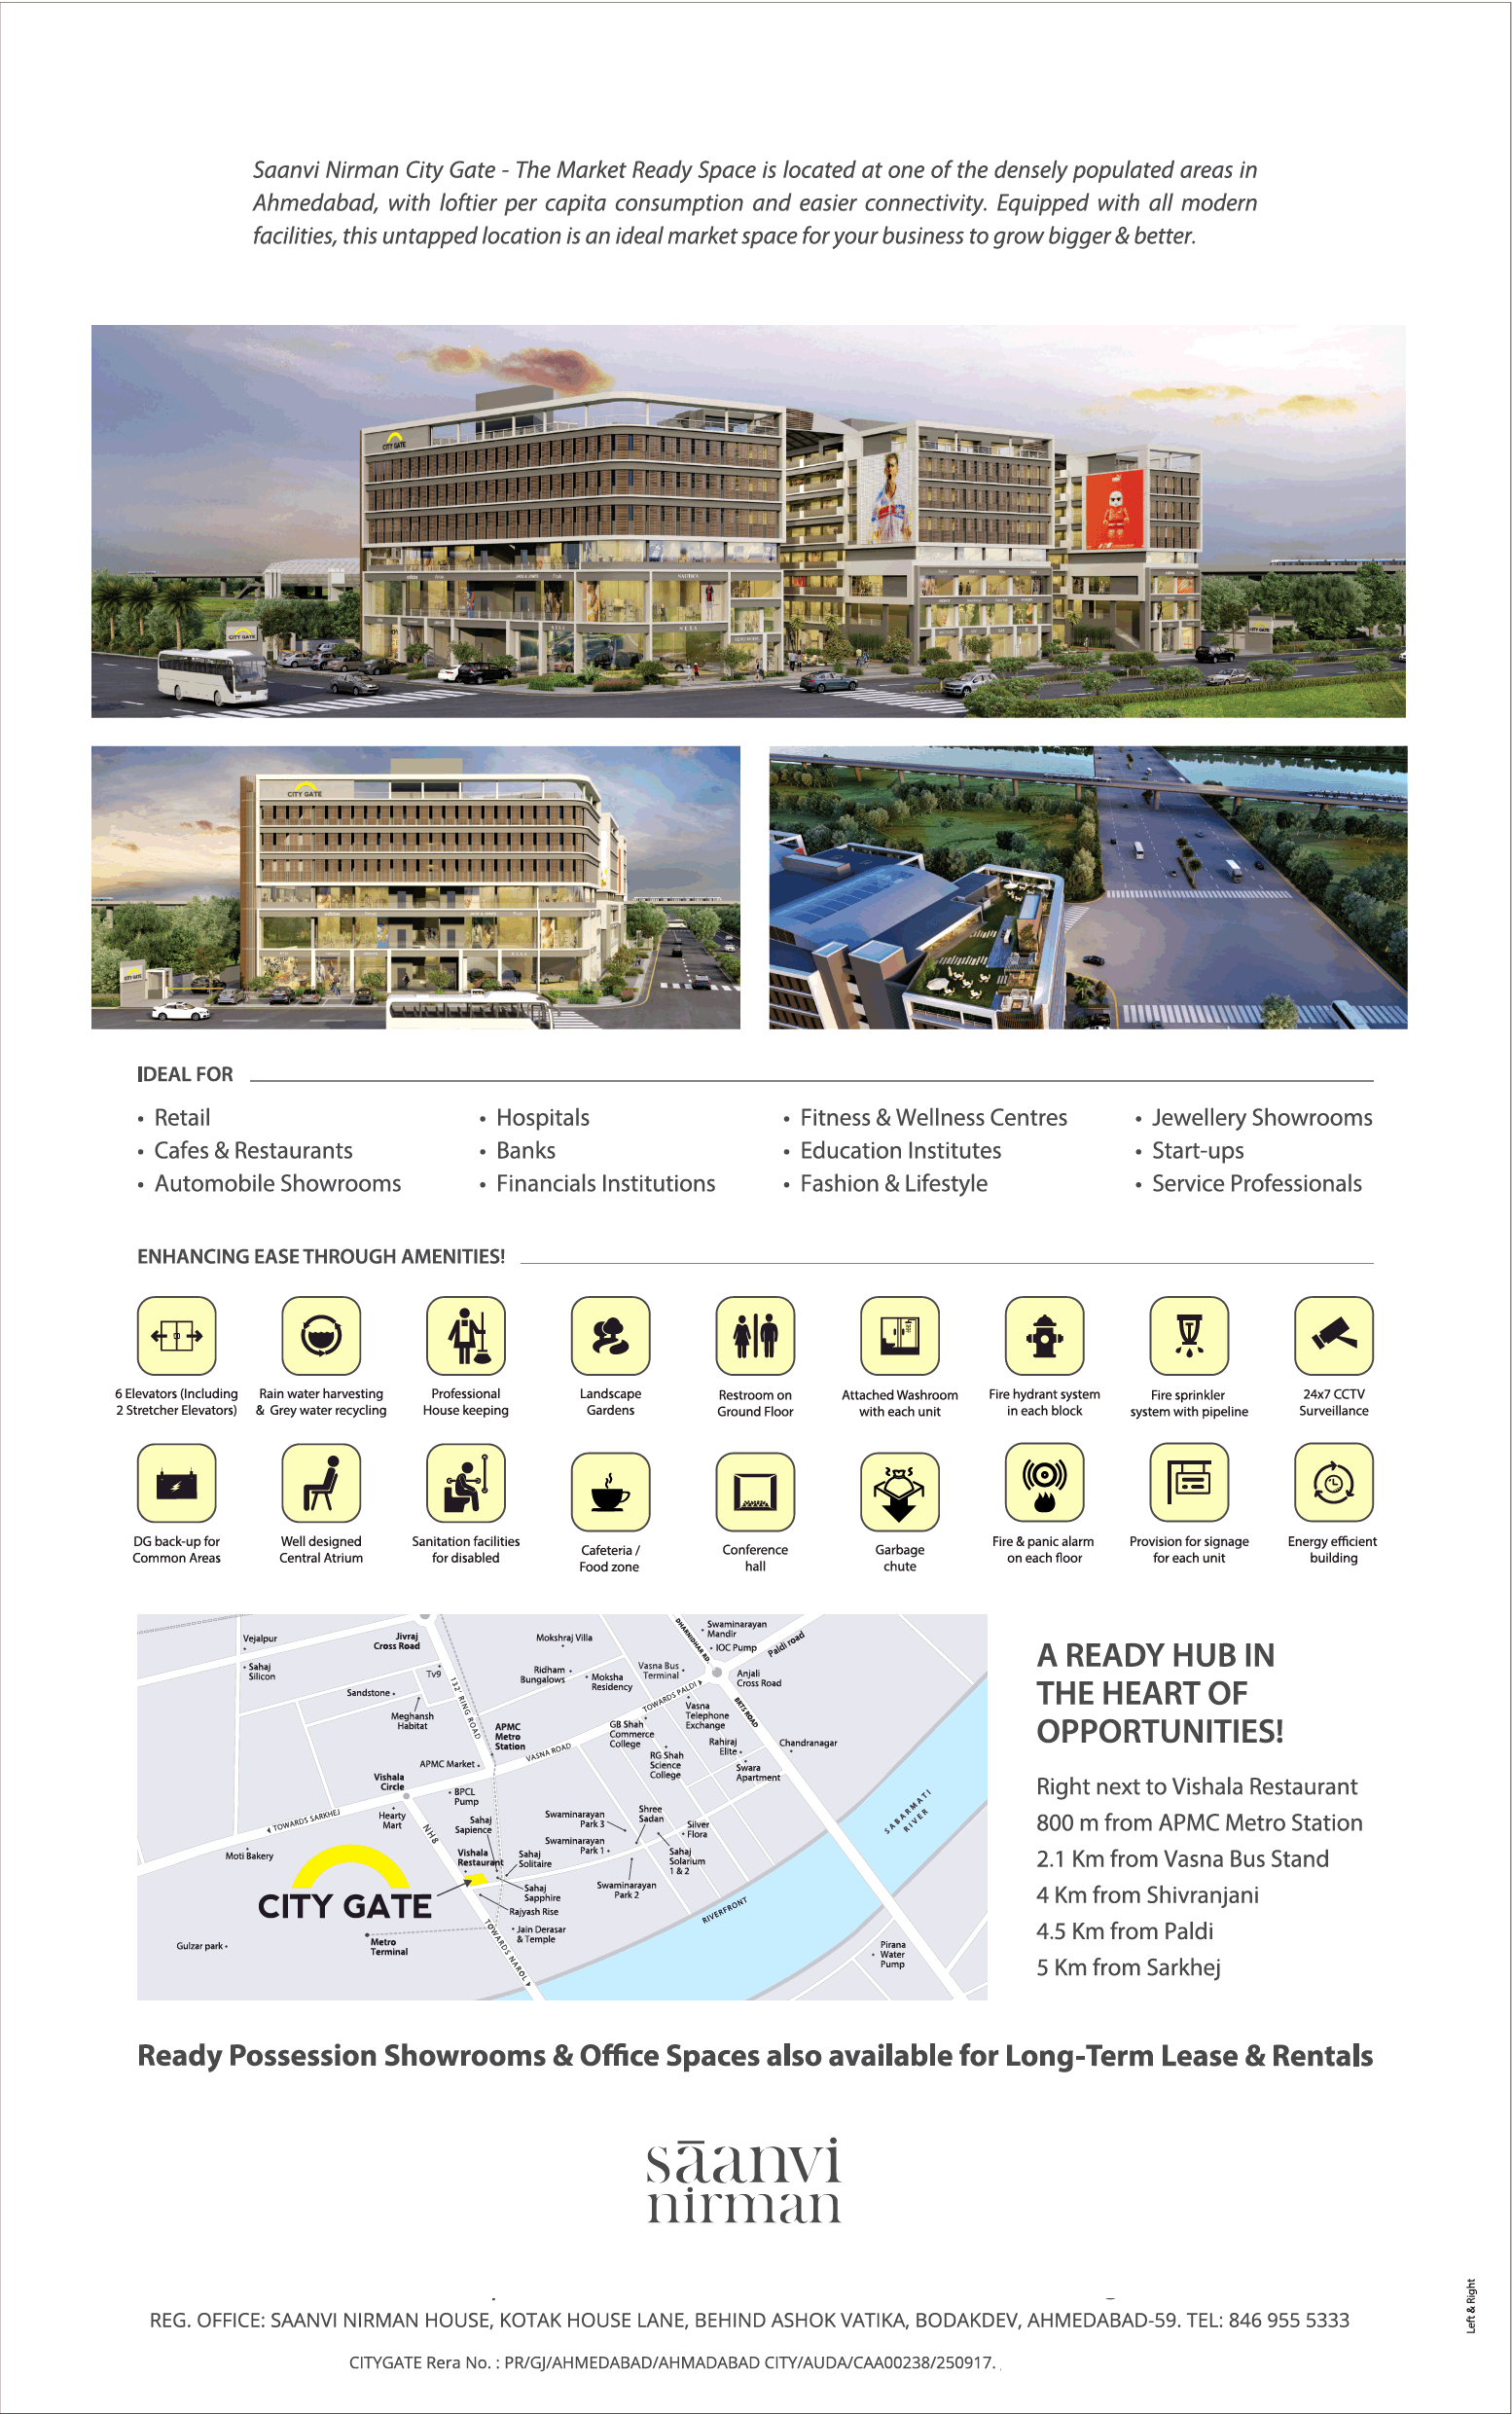 Ready Possession Showrooms & Office Spaces at Saanvi Nirman City Gate, Ahmedabad